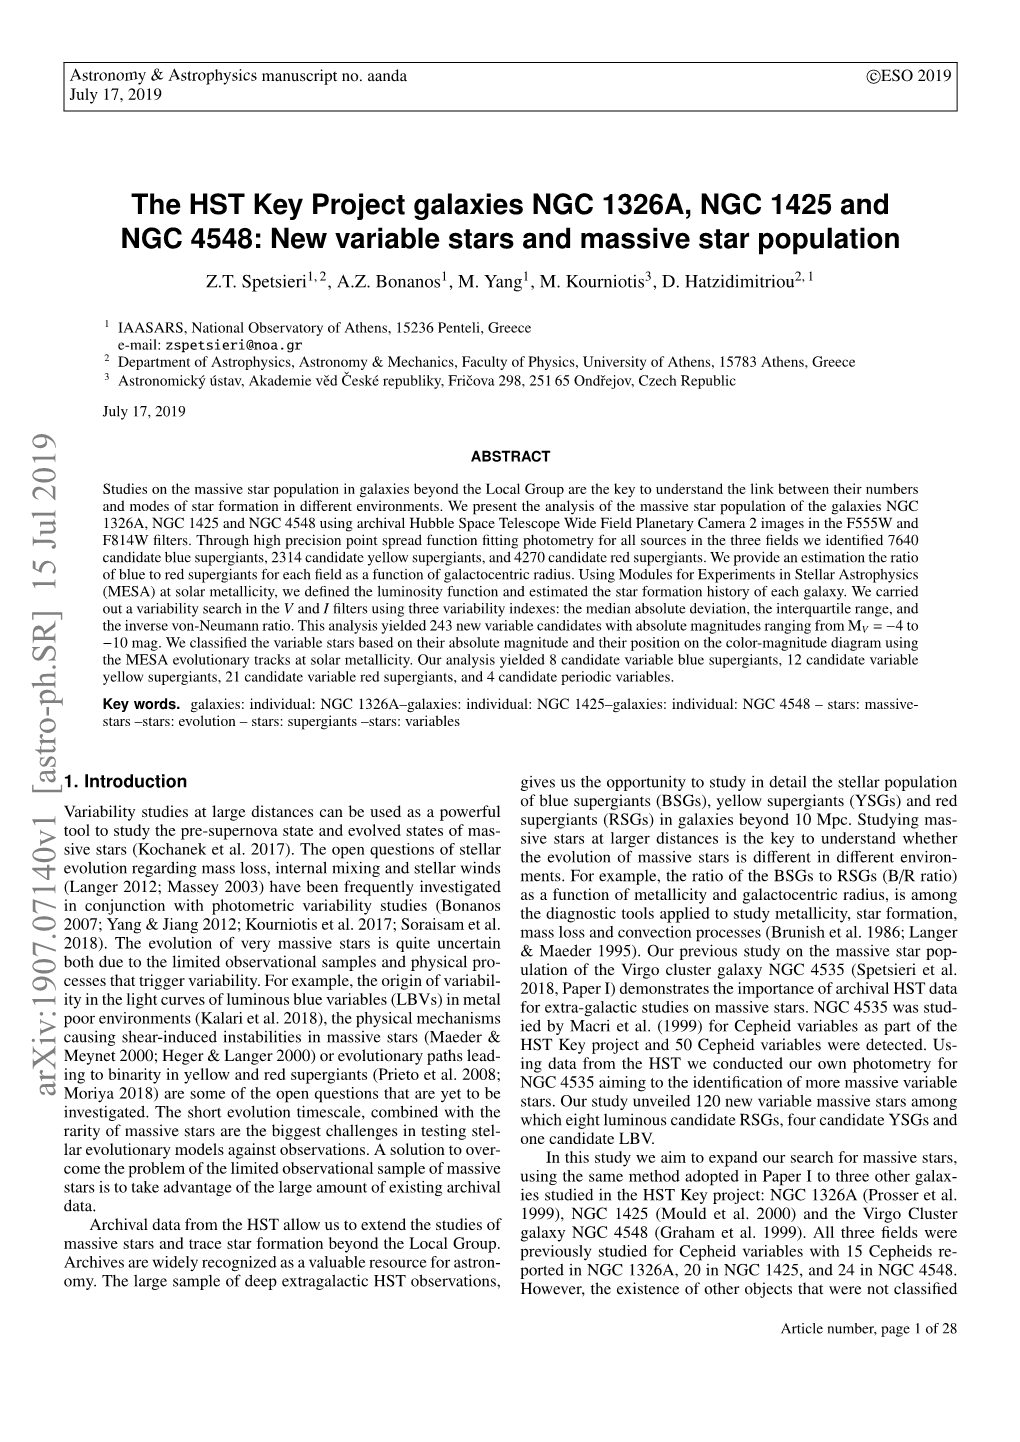 The HST Key Project Galaxies NGC 1326A, NGC 1425 and NGC 4548: New Variable Stars and Massive Star Population Z.T